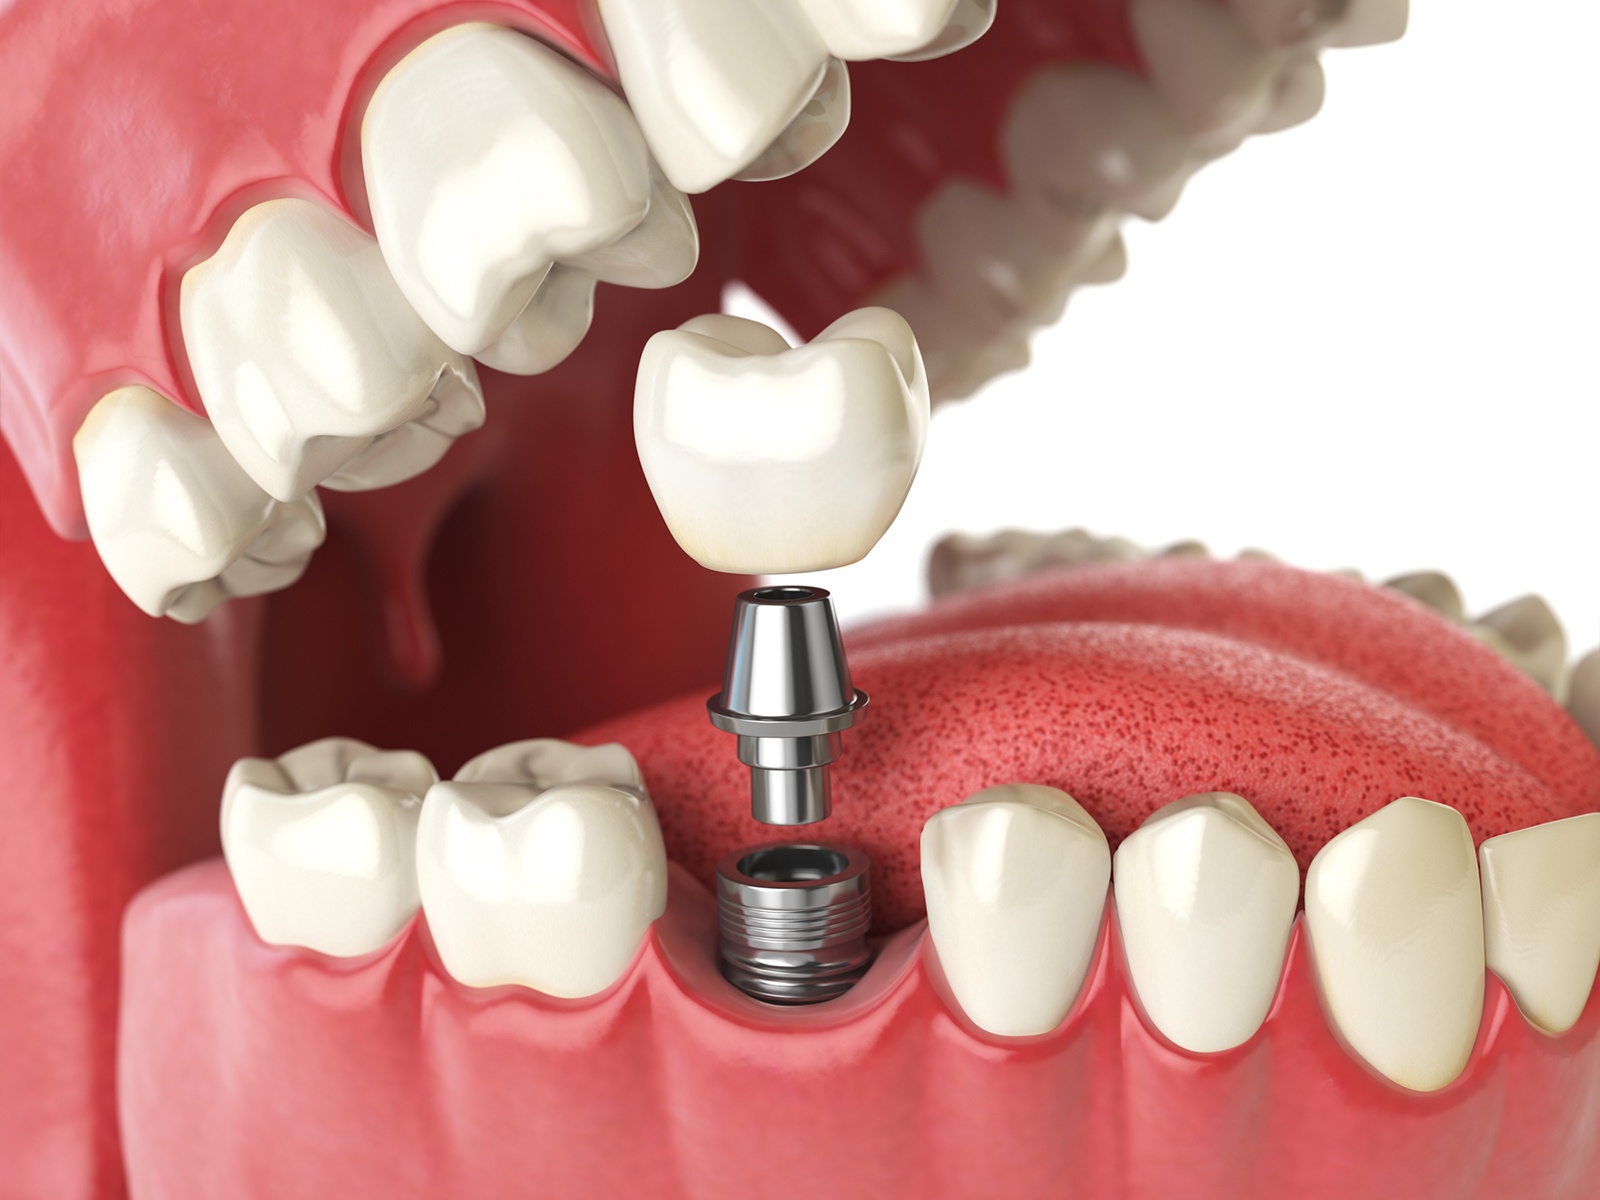 Can 1 implant replace 2 teeth?